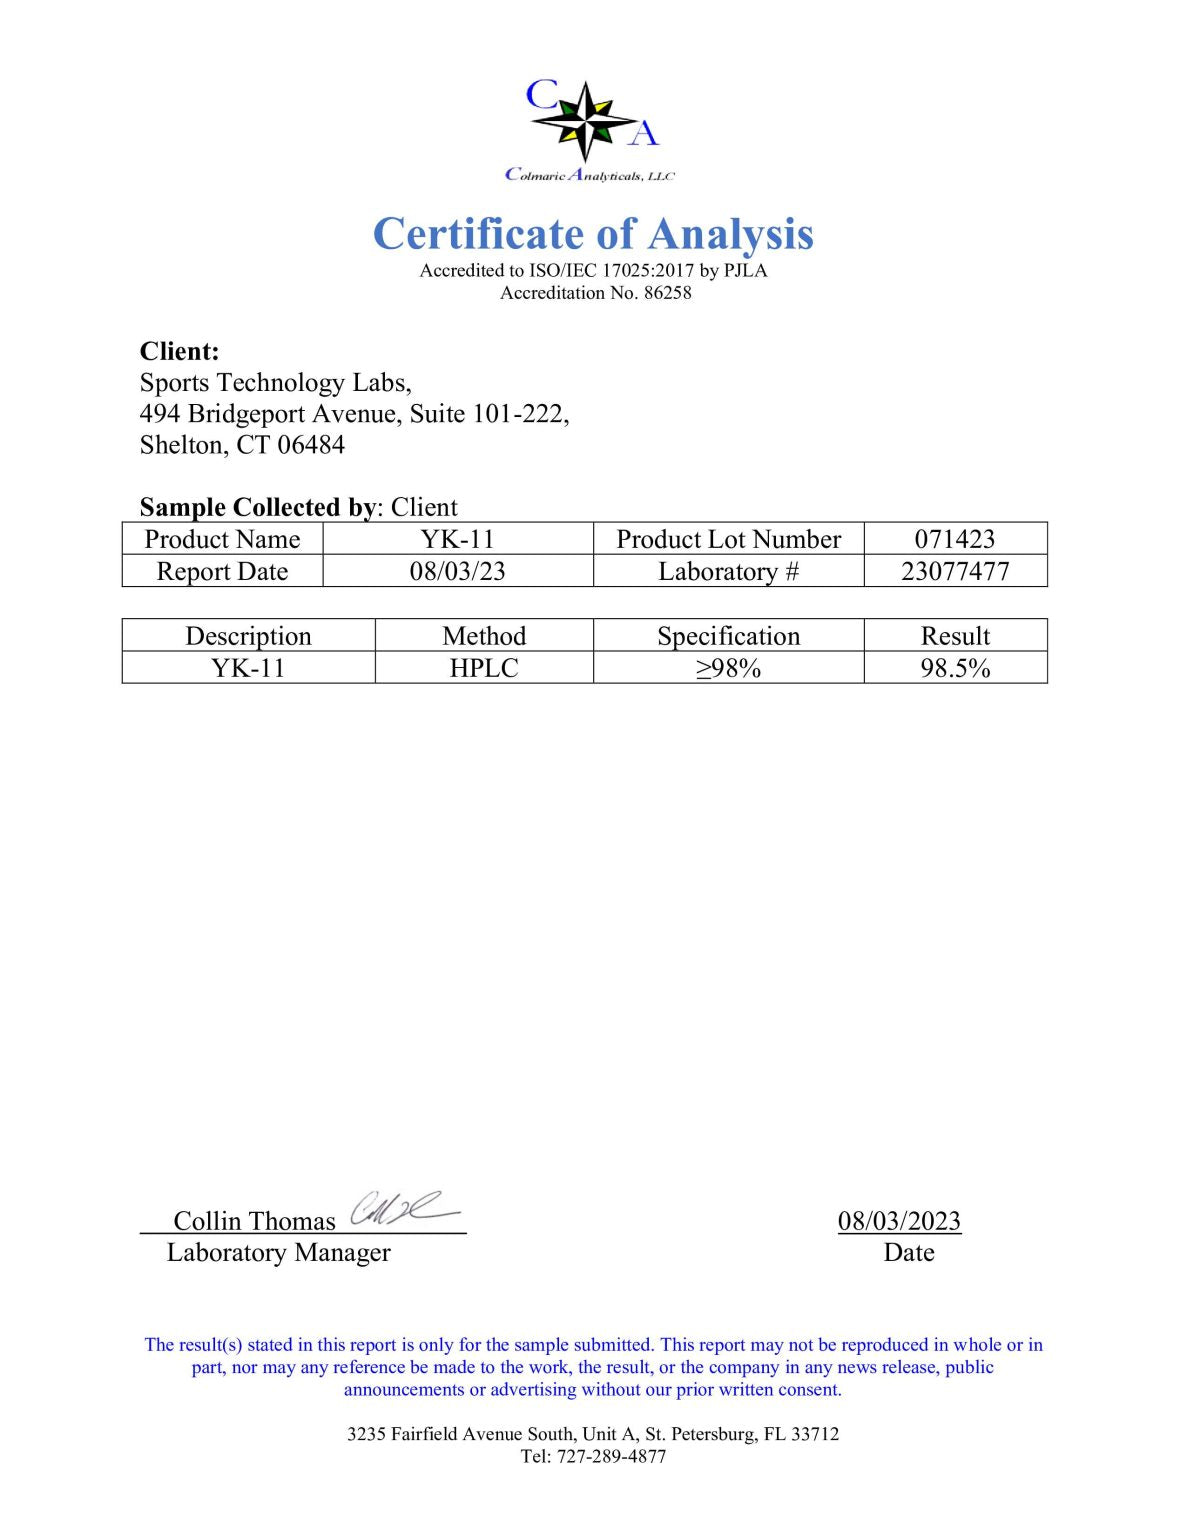 Sports Technology Labs Liquid SARMs YK 11 Certificate of Analysis